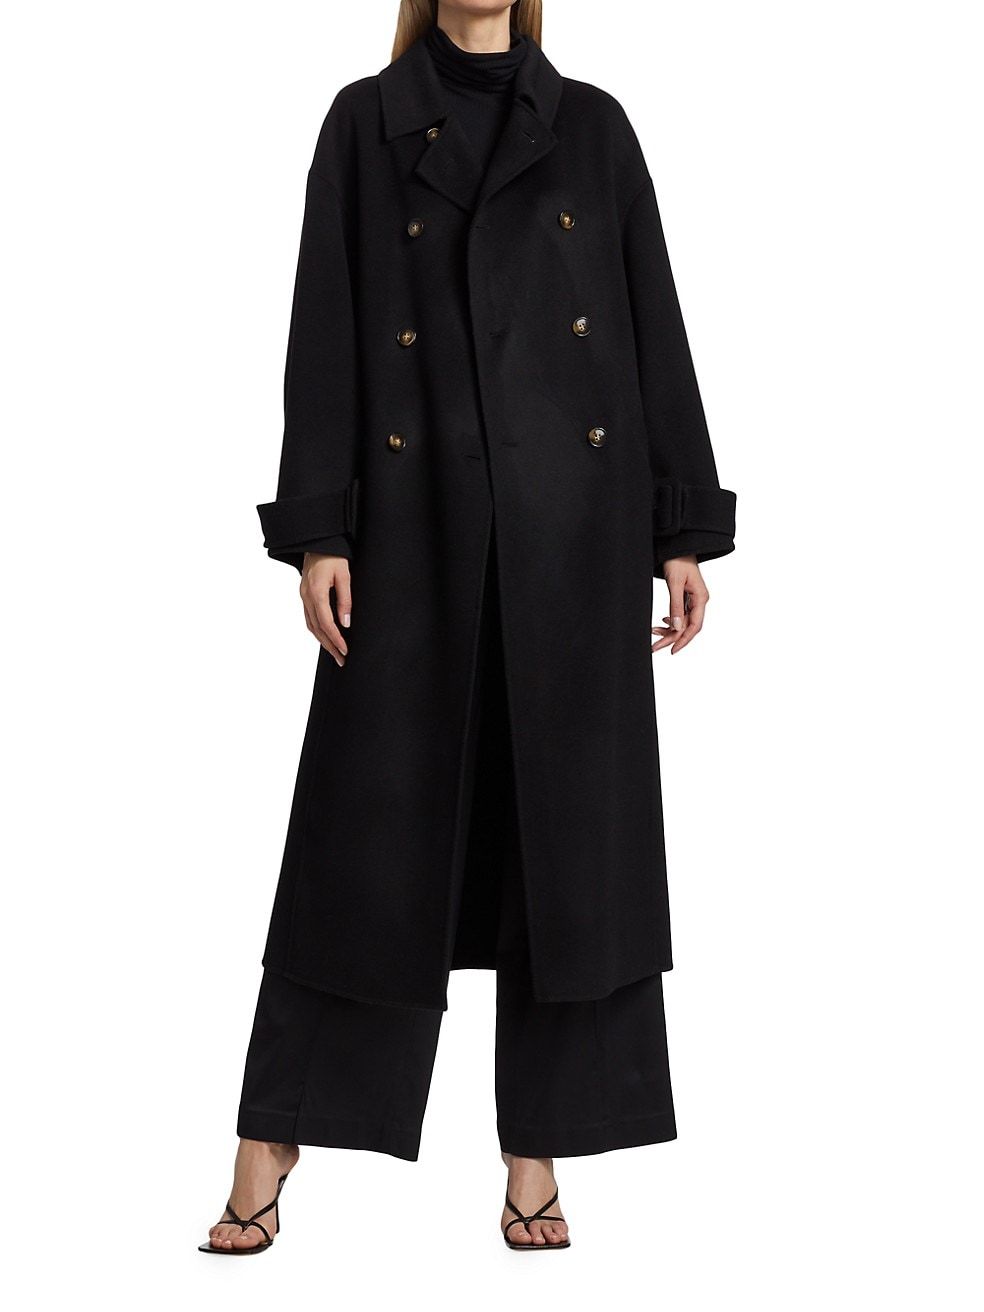 Boras Wool-Cashmere Trench Coat | Saks Fifth Avenue